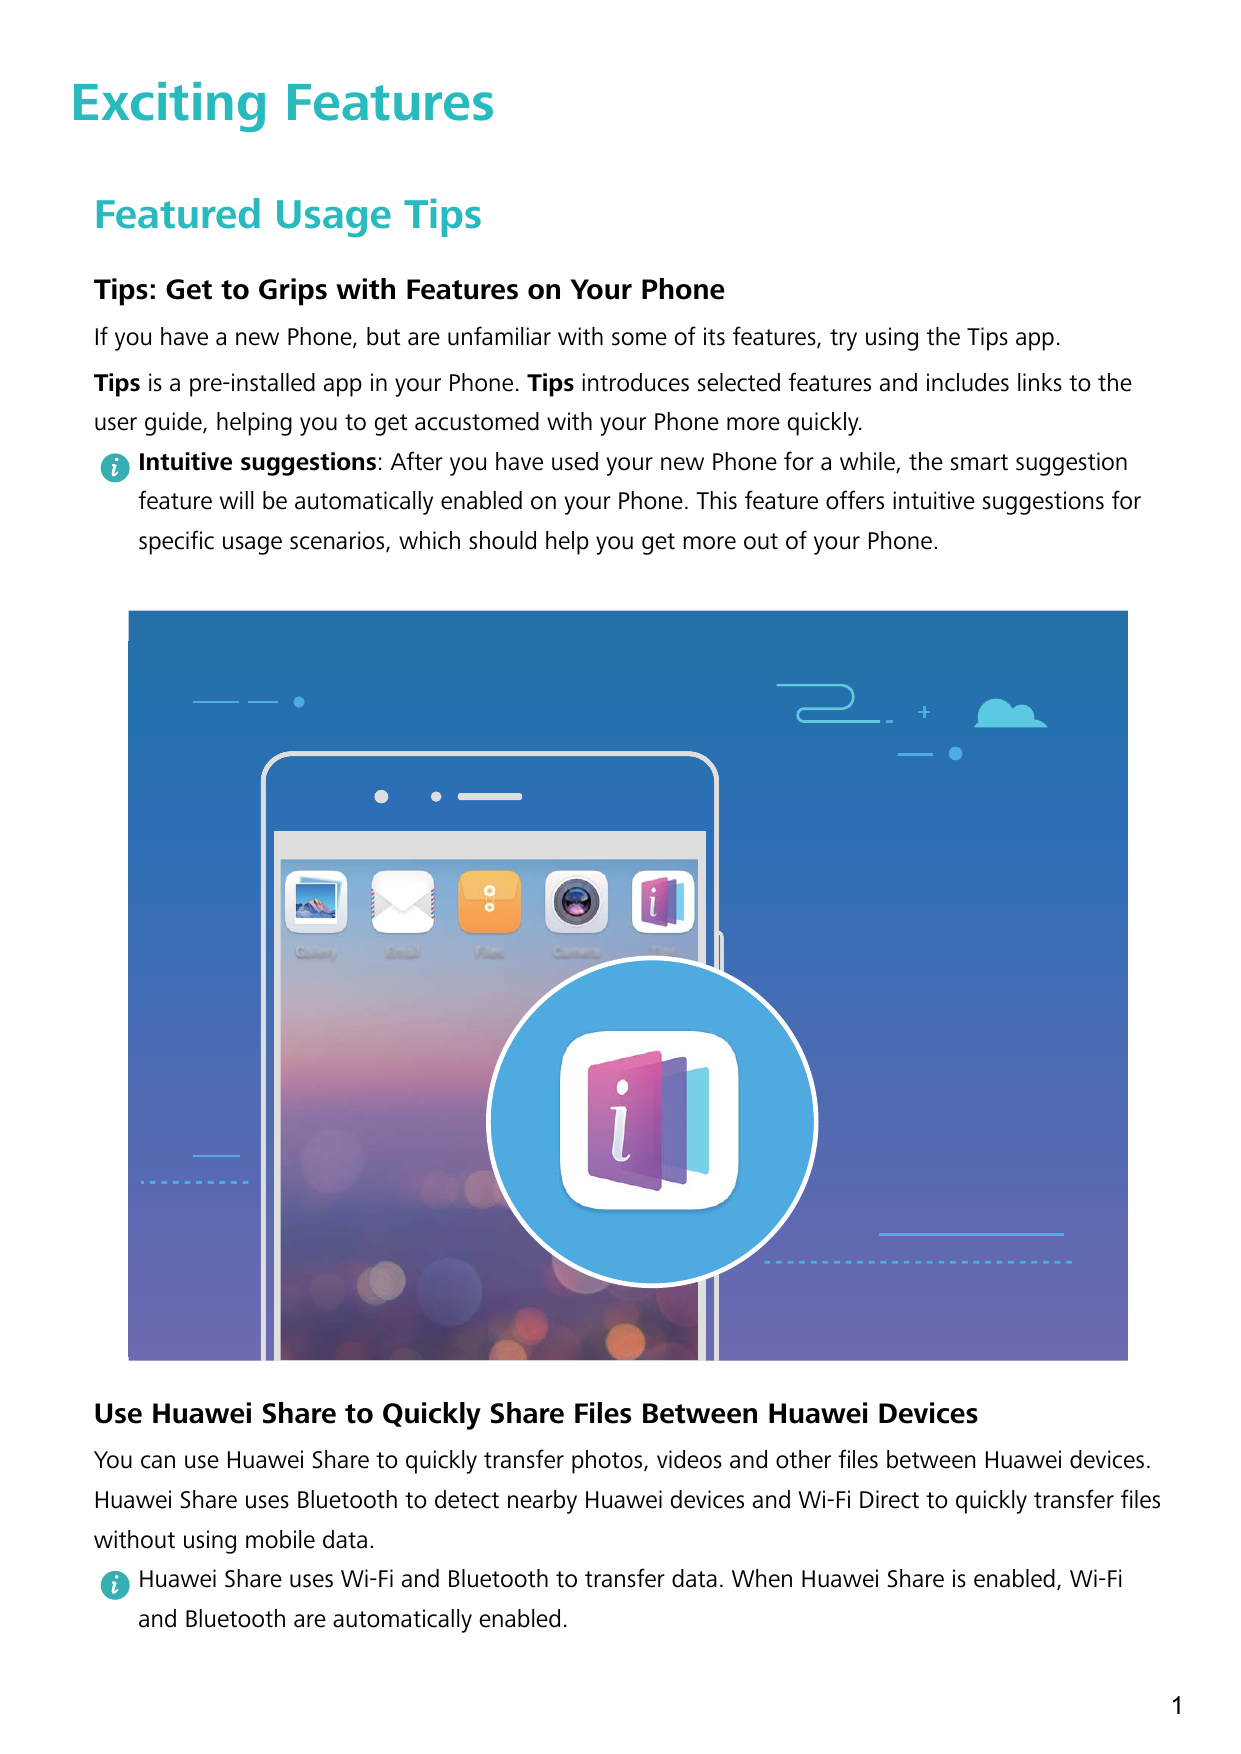 Exciting FeaturesFeatured Usage TipsTips: Get to Grips with Features on Your PhoneIf you have a new Phone, but are unfamiliar wi